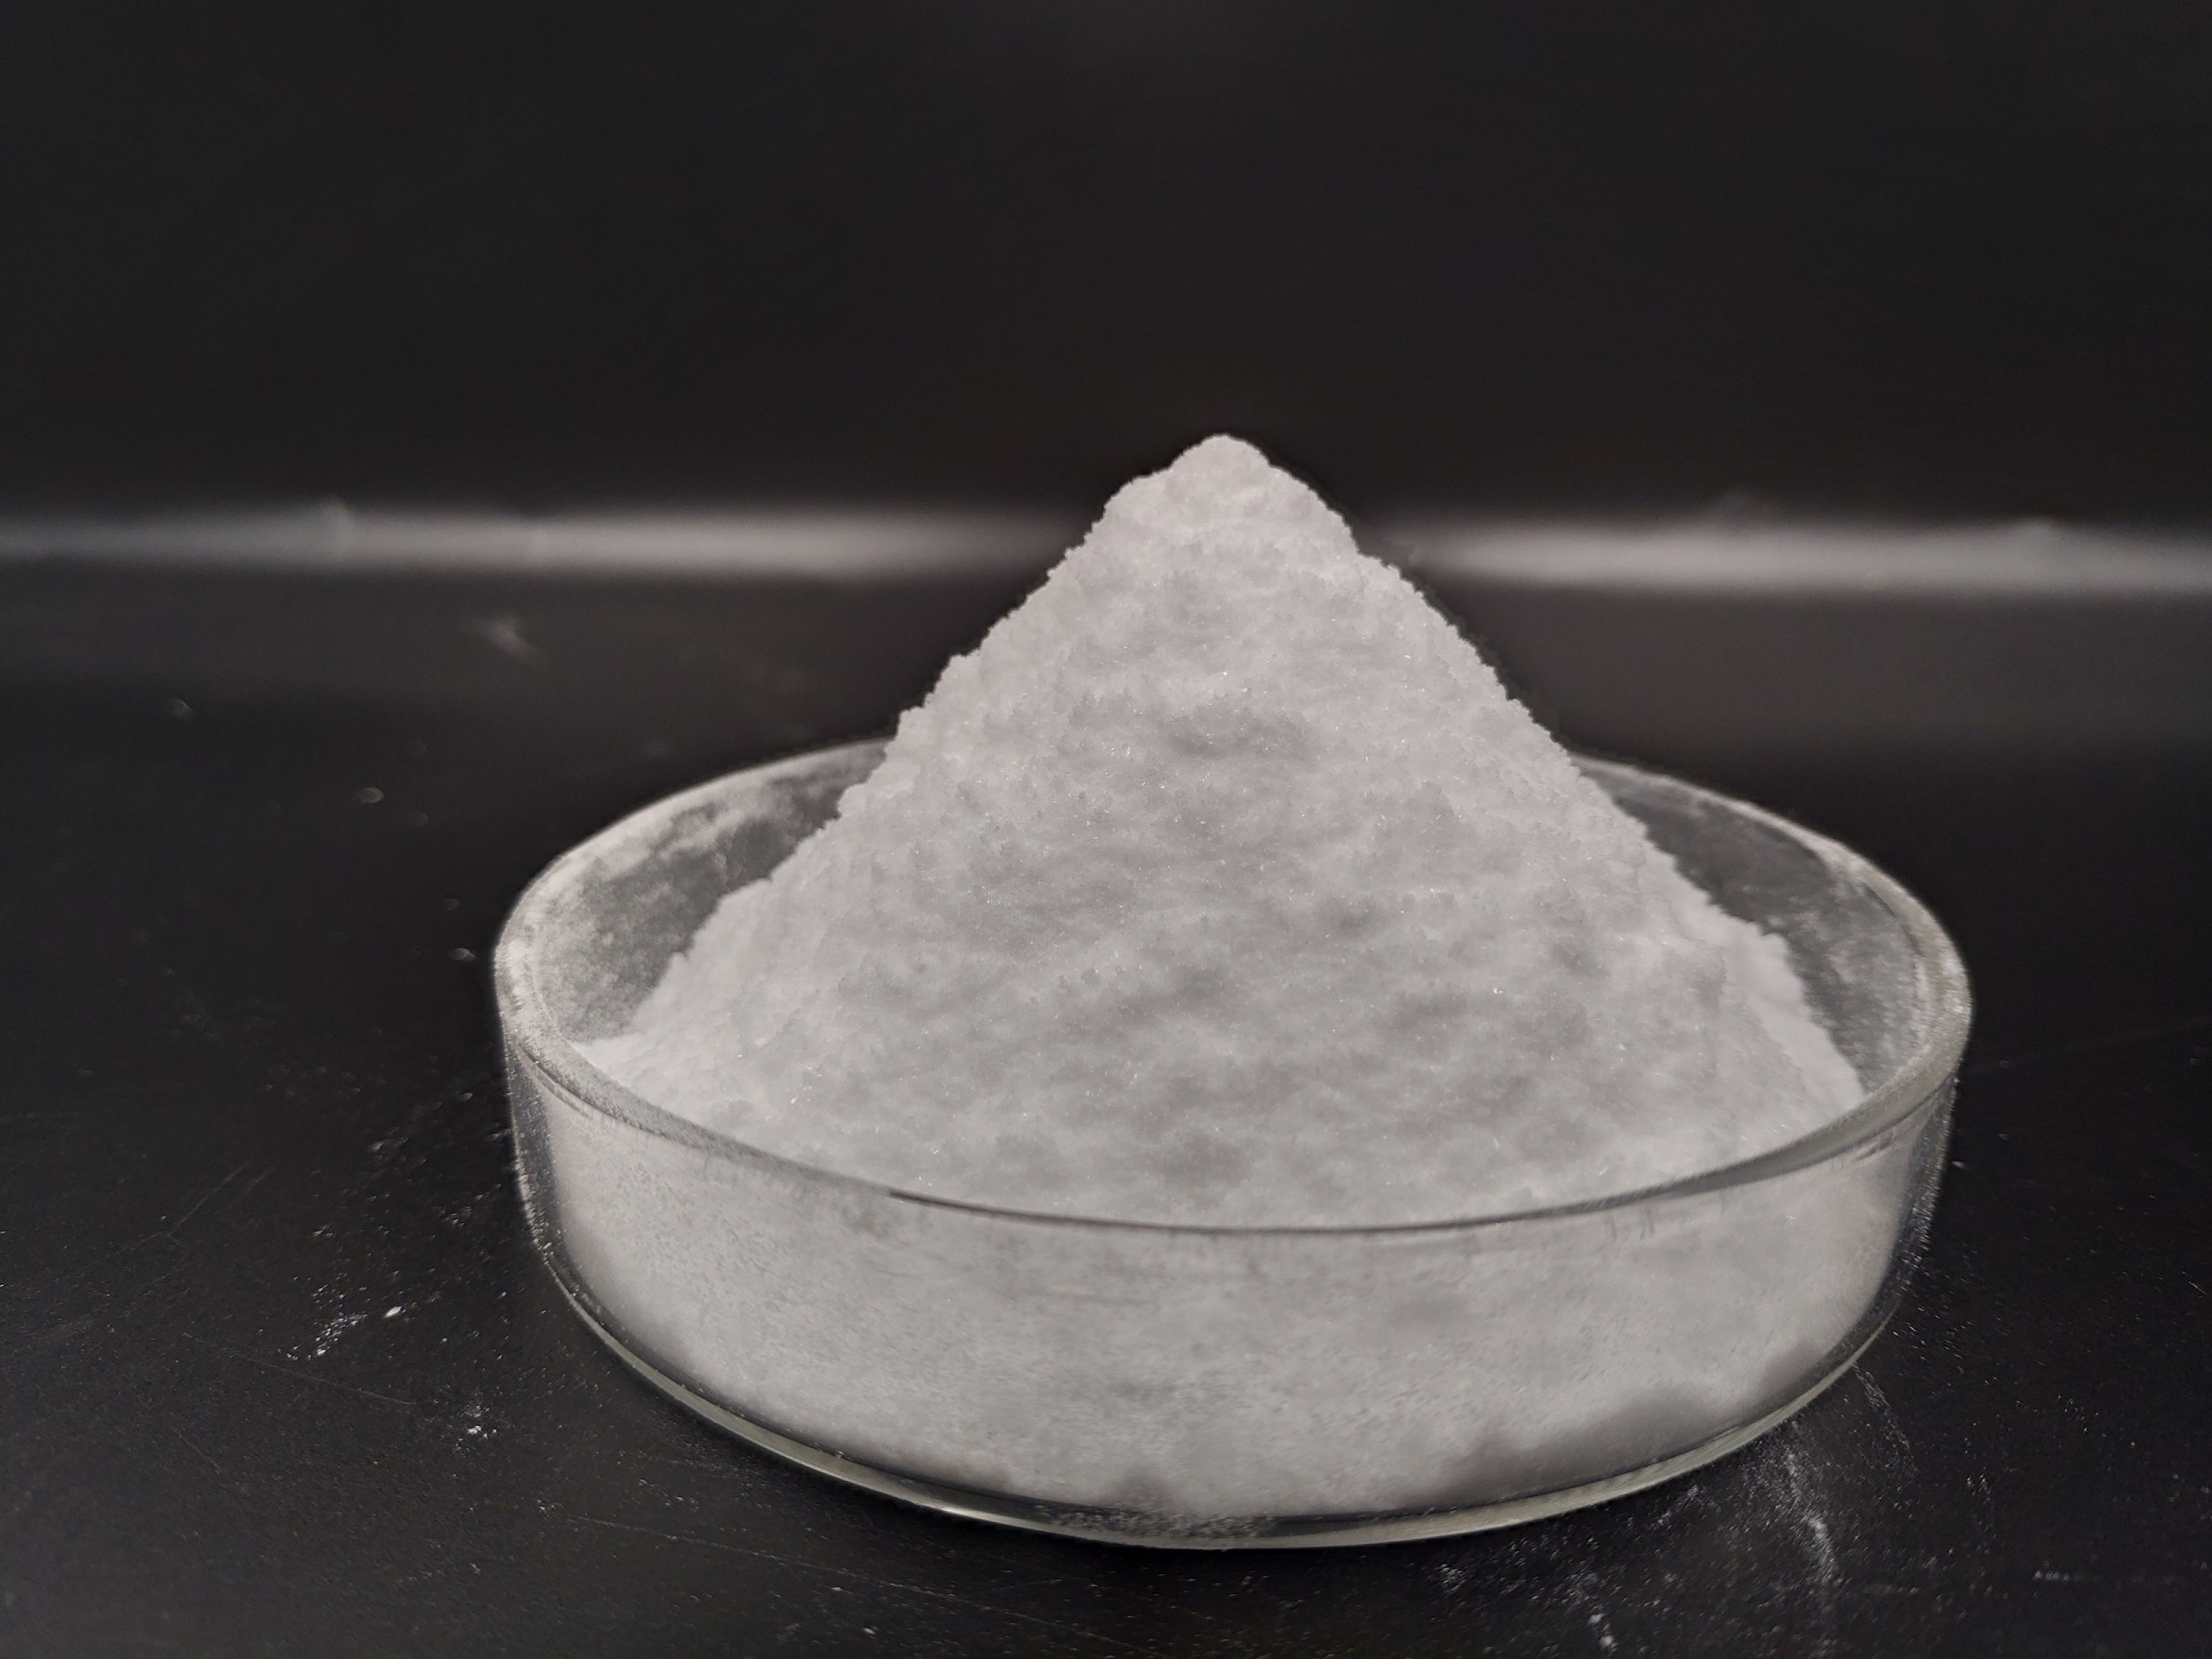 Buy Tetracaine Powder Tetracaine Base From China Manufacturer MULEI CAS: 94-24-6